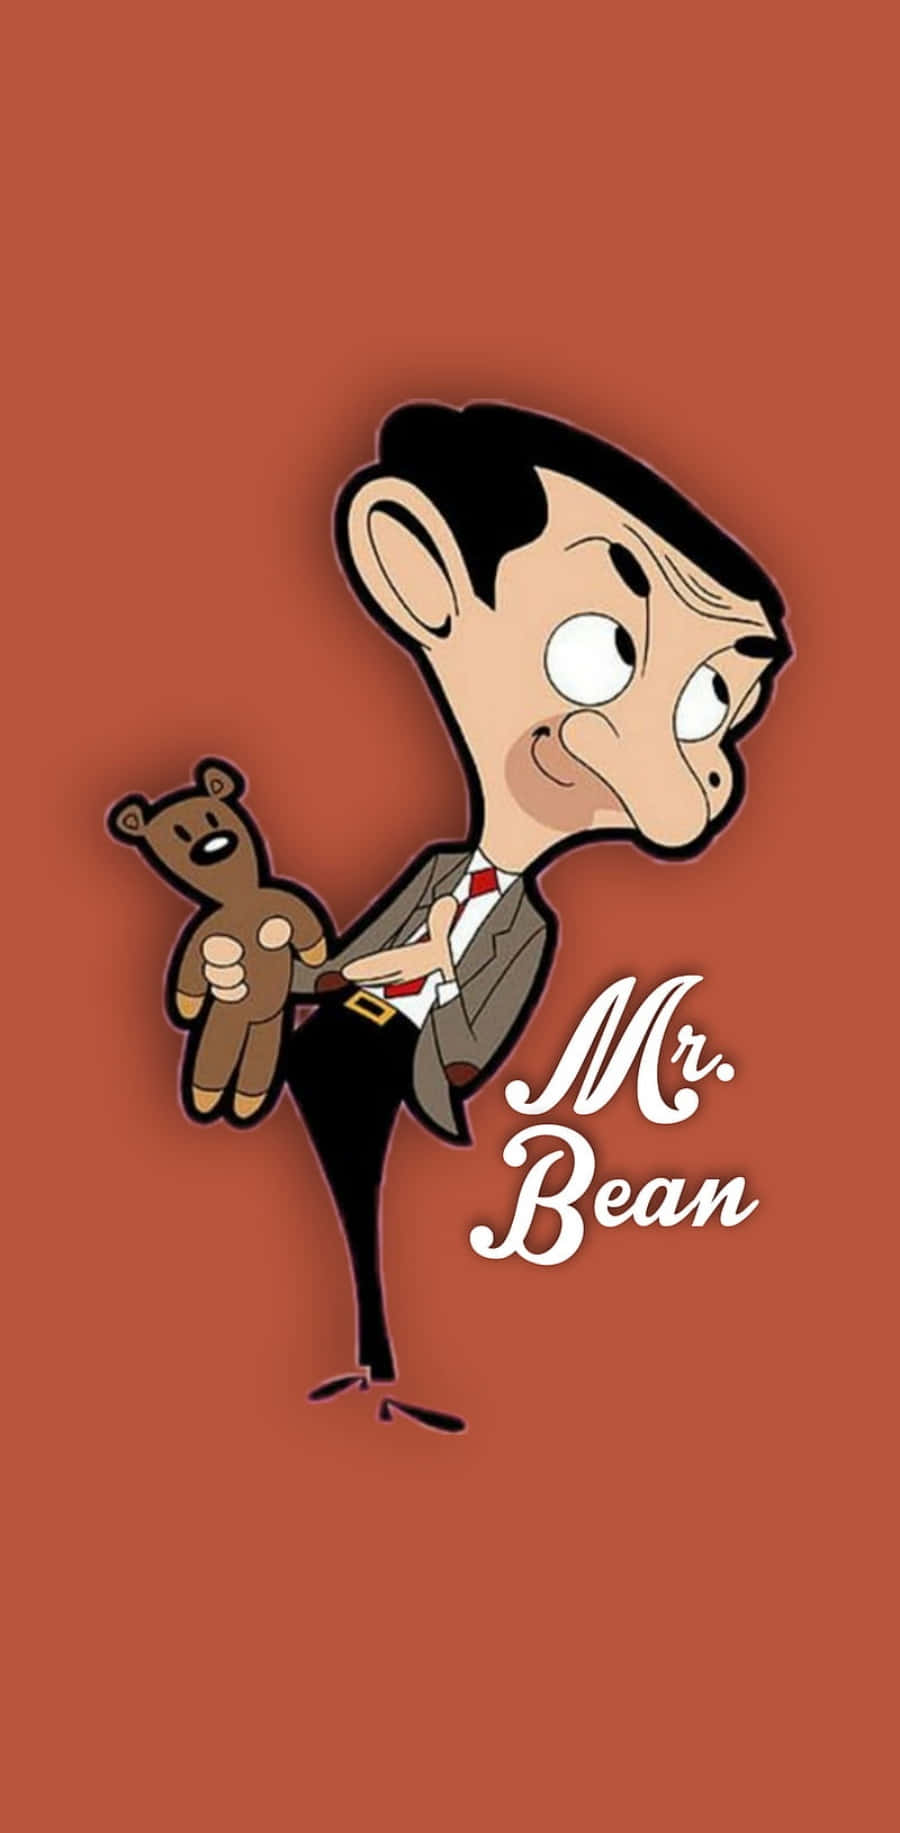 Mr Bean's Comical Expression